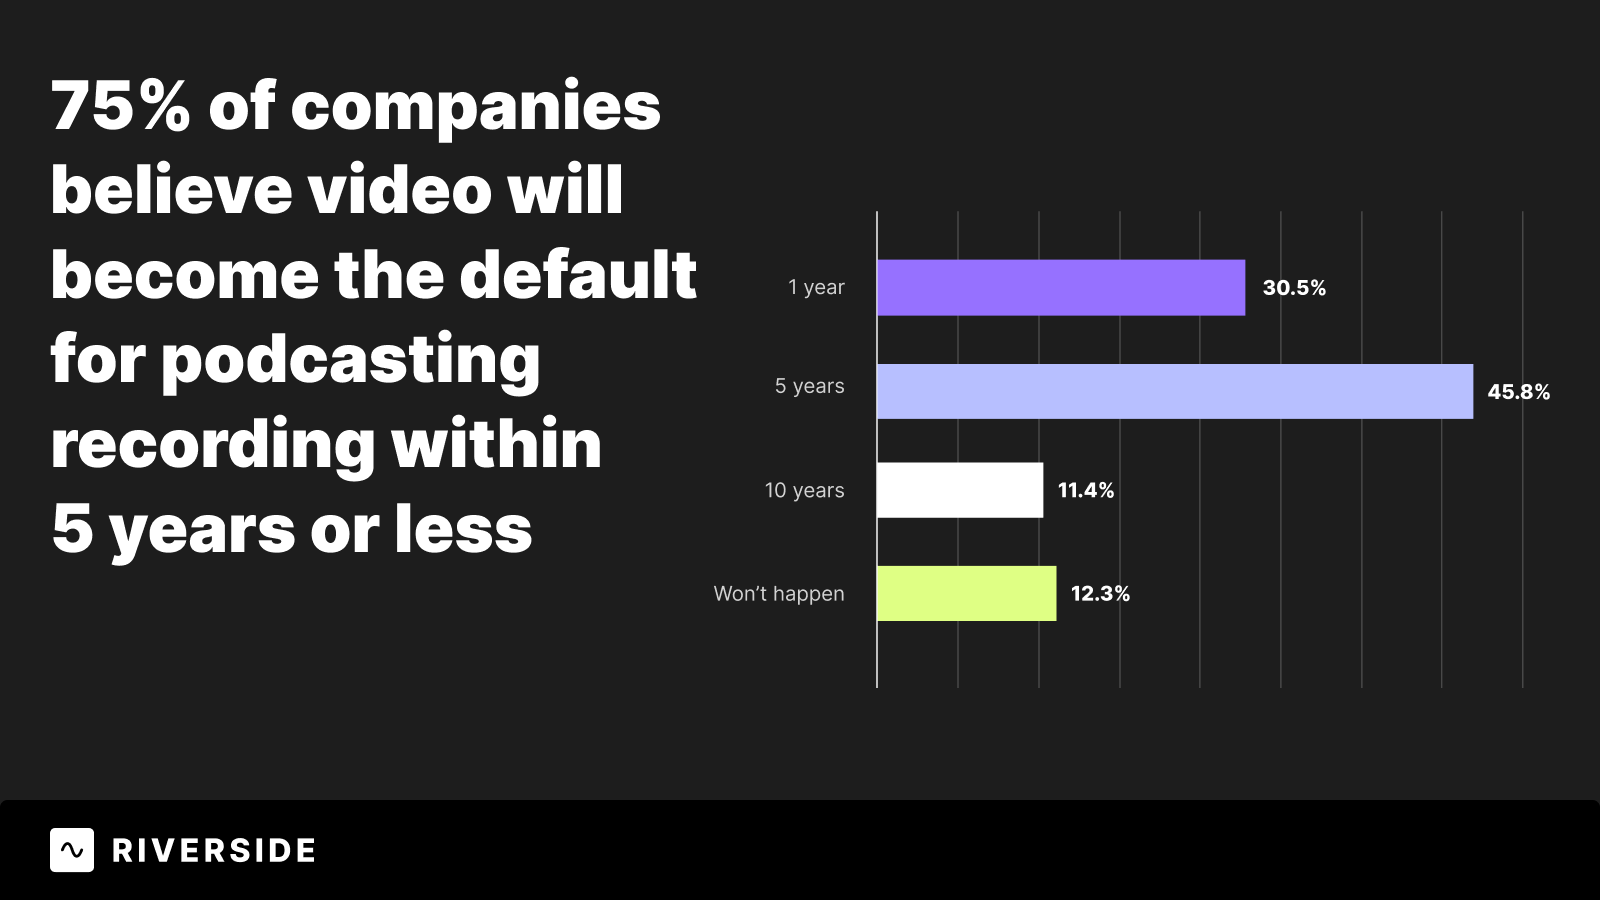 Percentage of companies that think video will become the podcasting default in 5 years time